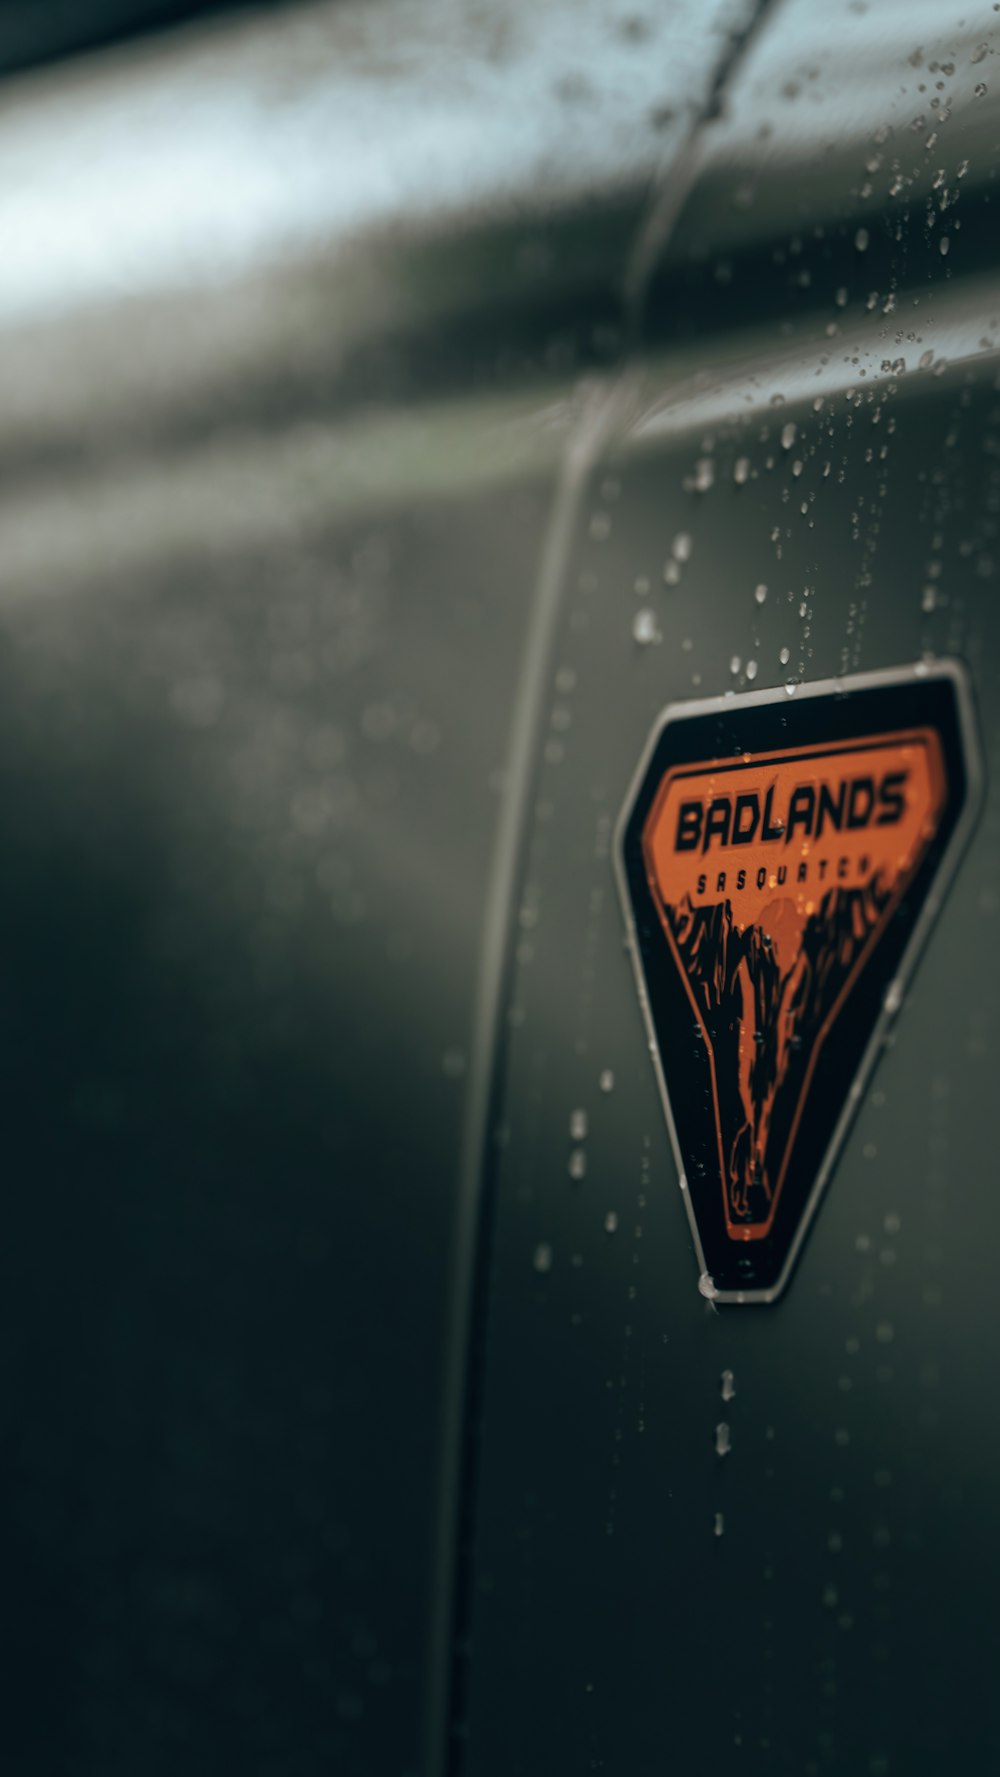 a close up of a badge on a vehicle